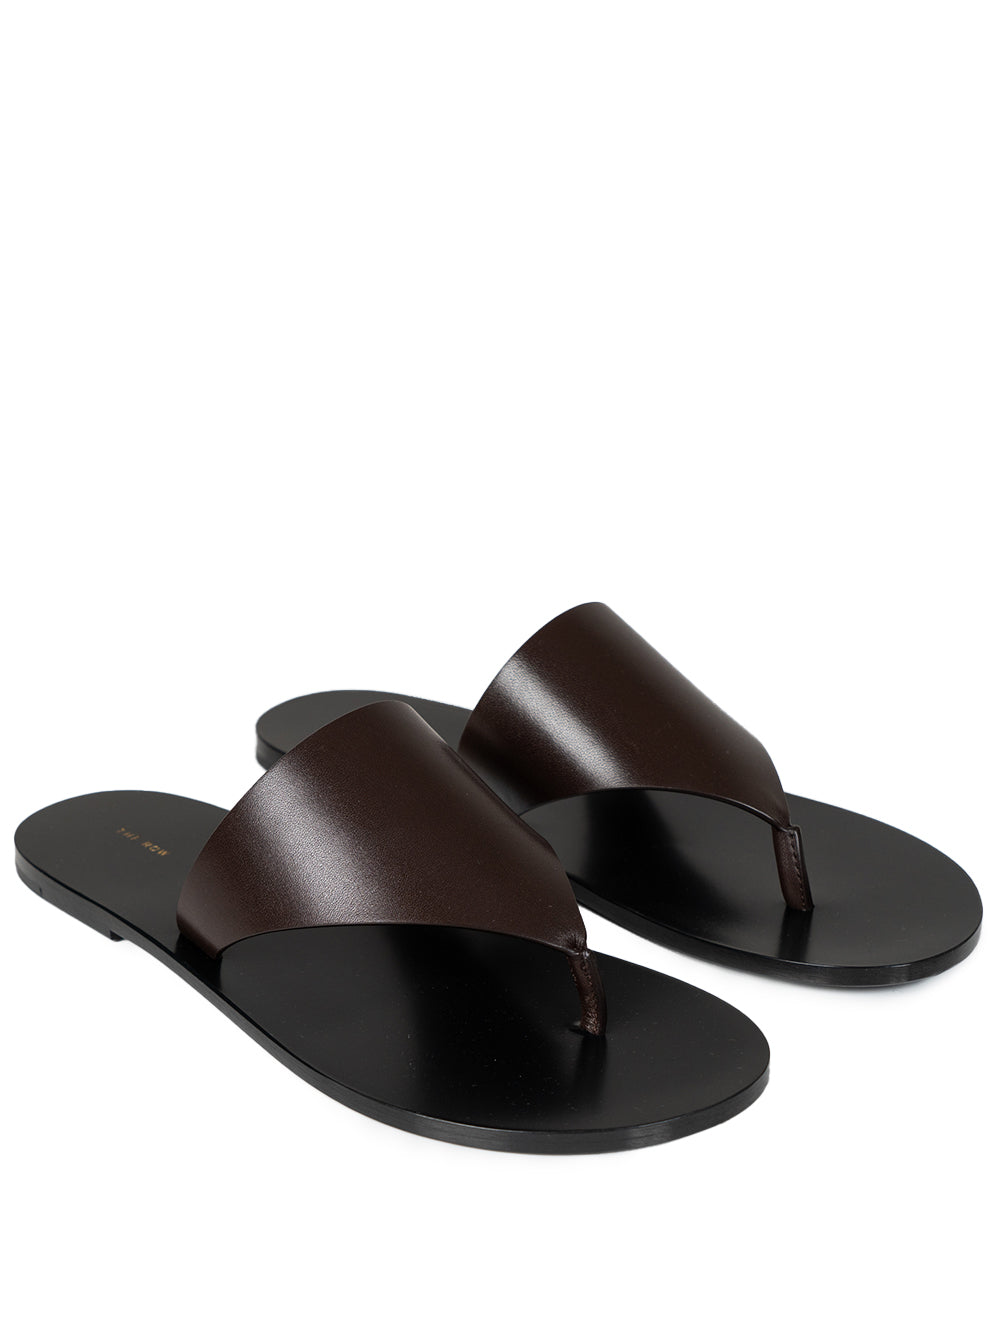 Avery Sandals